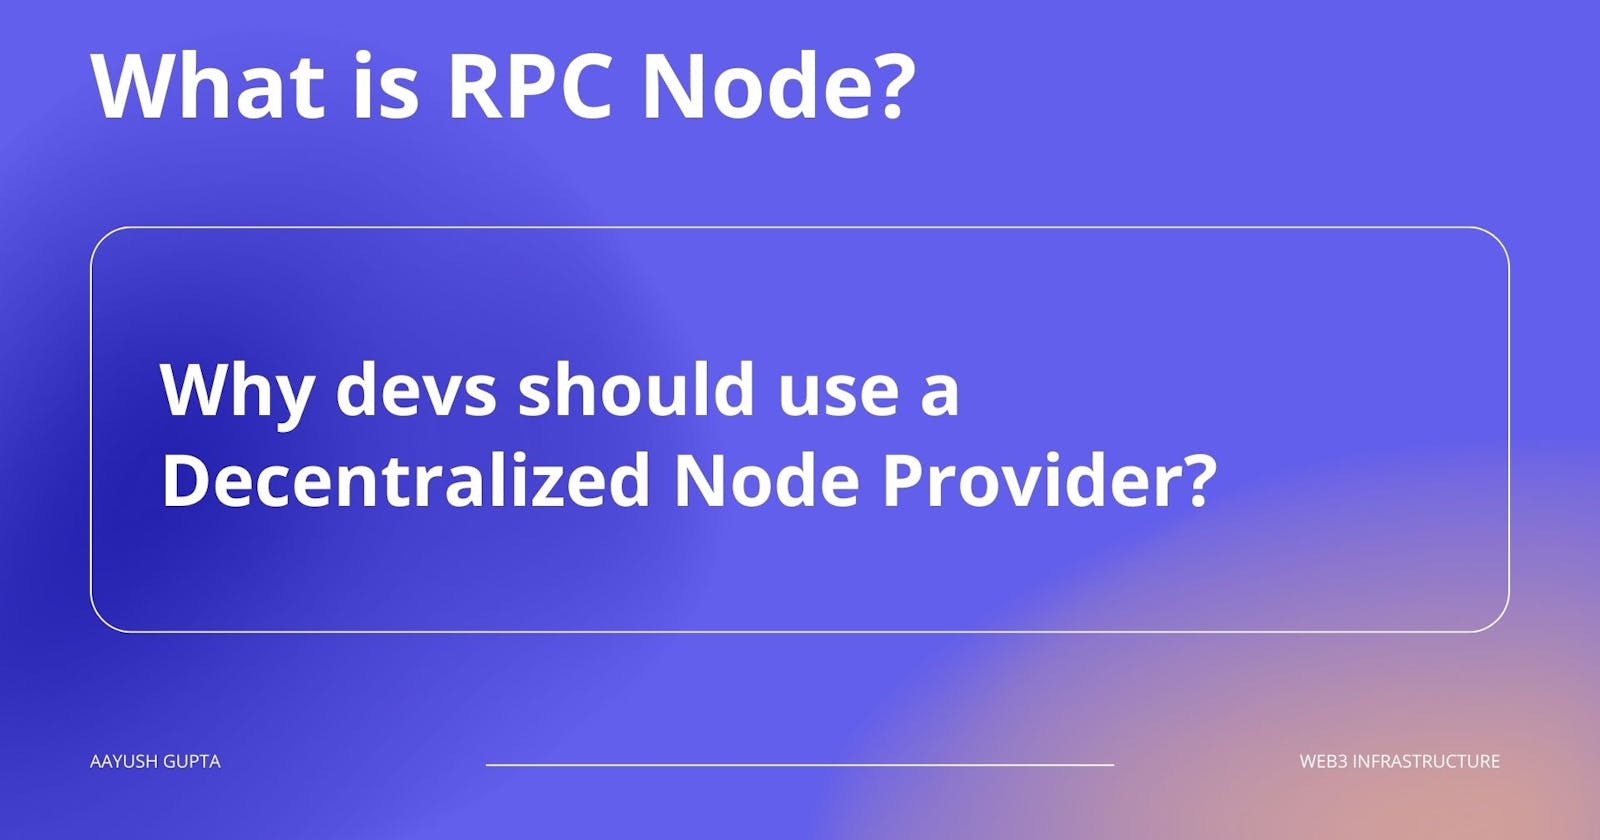 What is RPC Node? Why Devs should use Decentralized Node Providers?